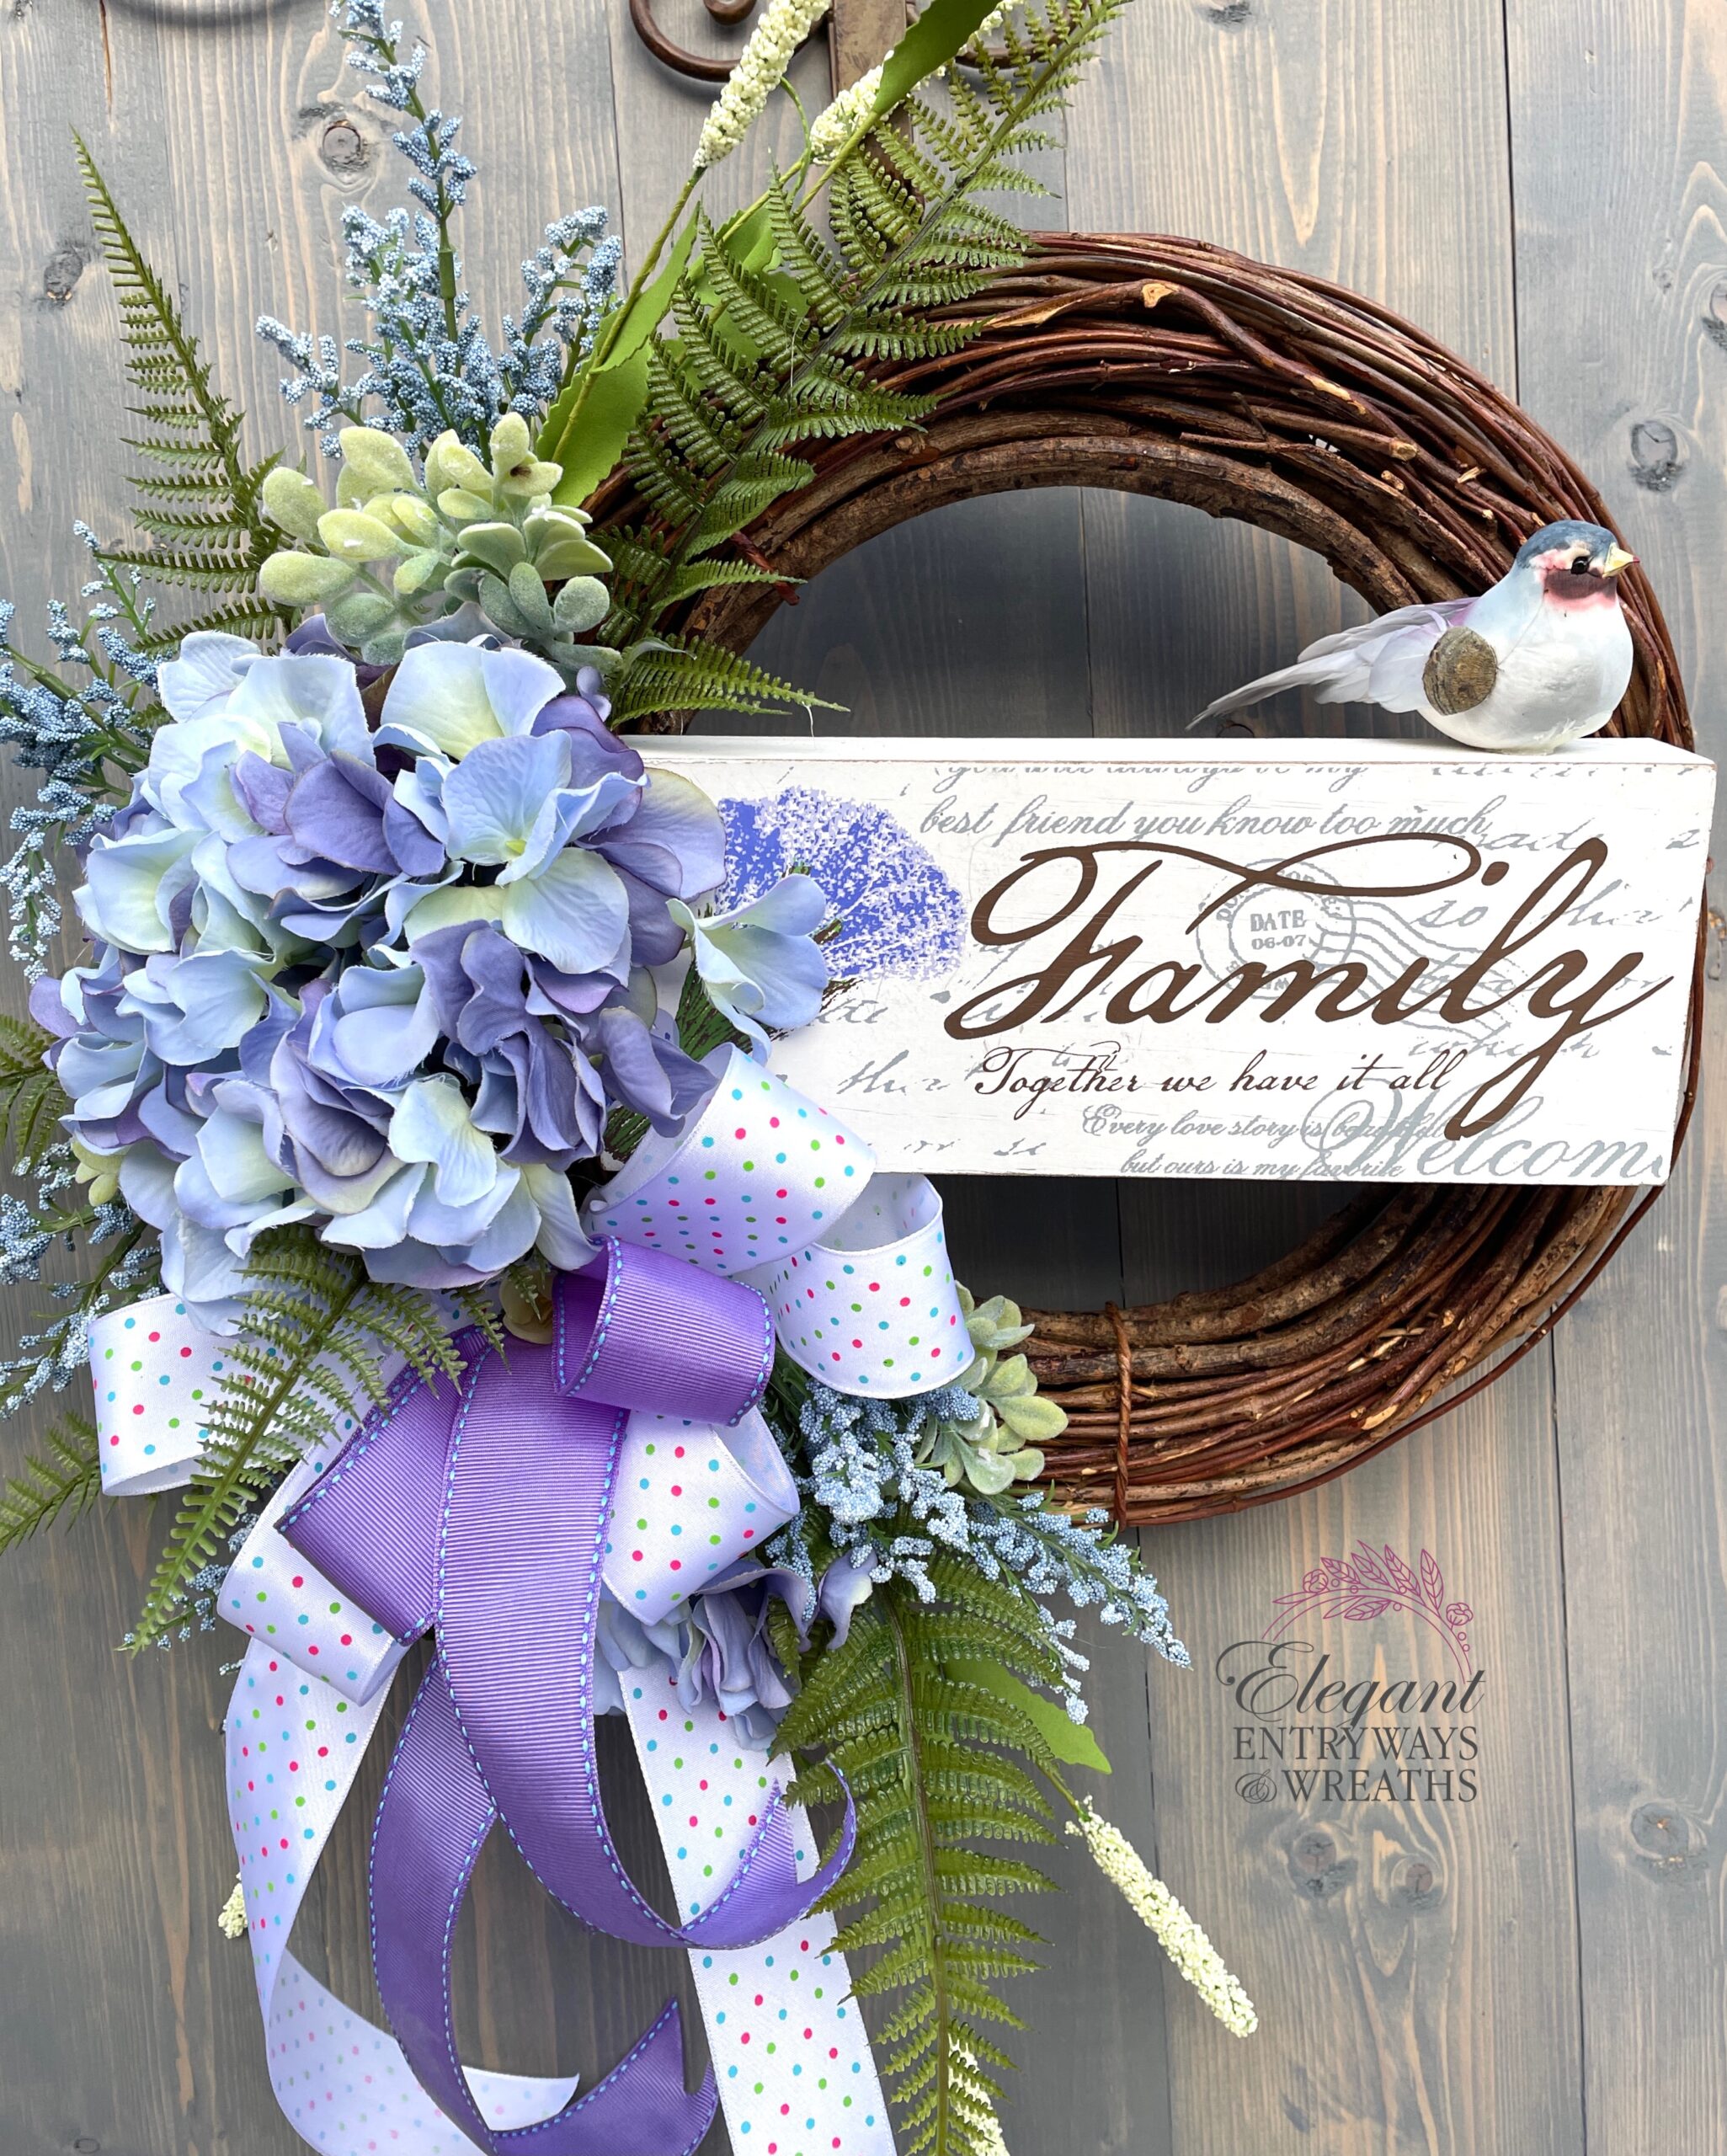 Wreath with purple ribbon, a bird, and a sign that says "family".